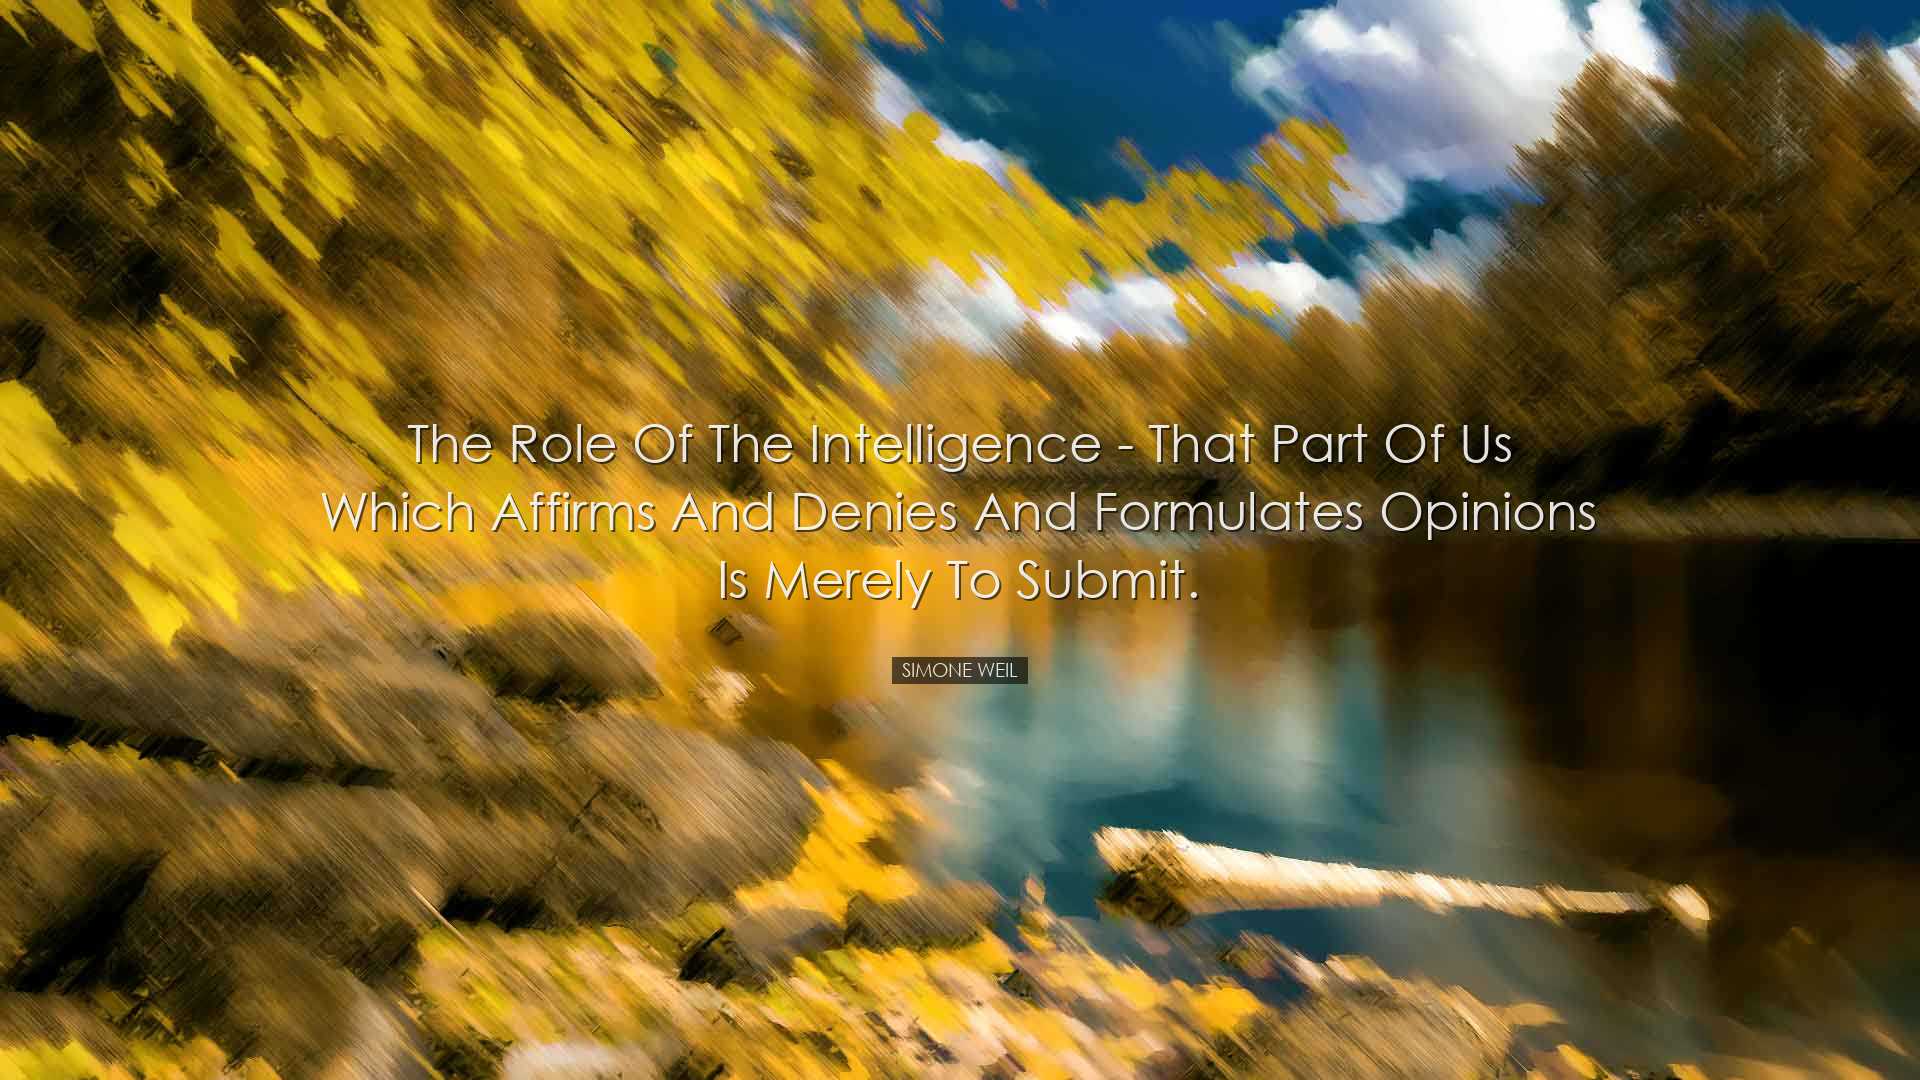 The role of the intelligence - that part of us which affirms and d